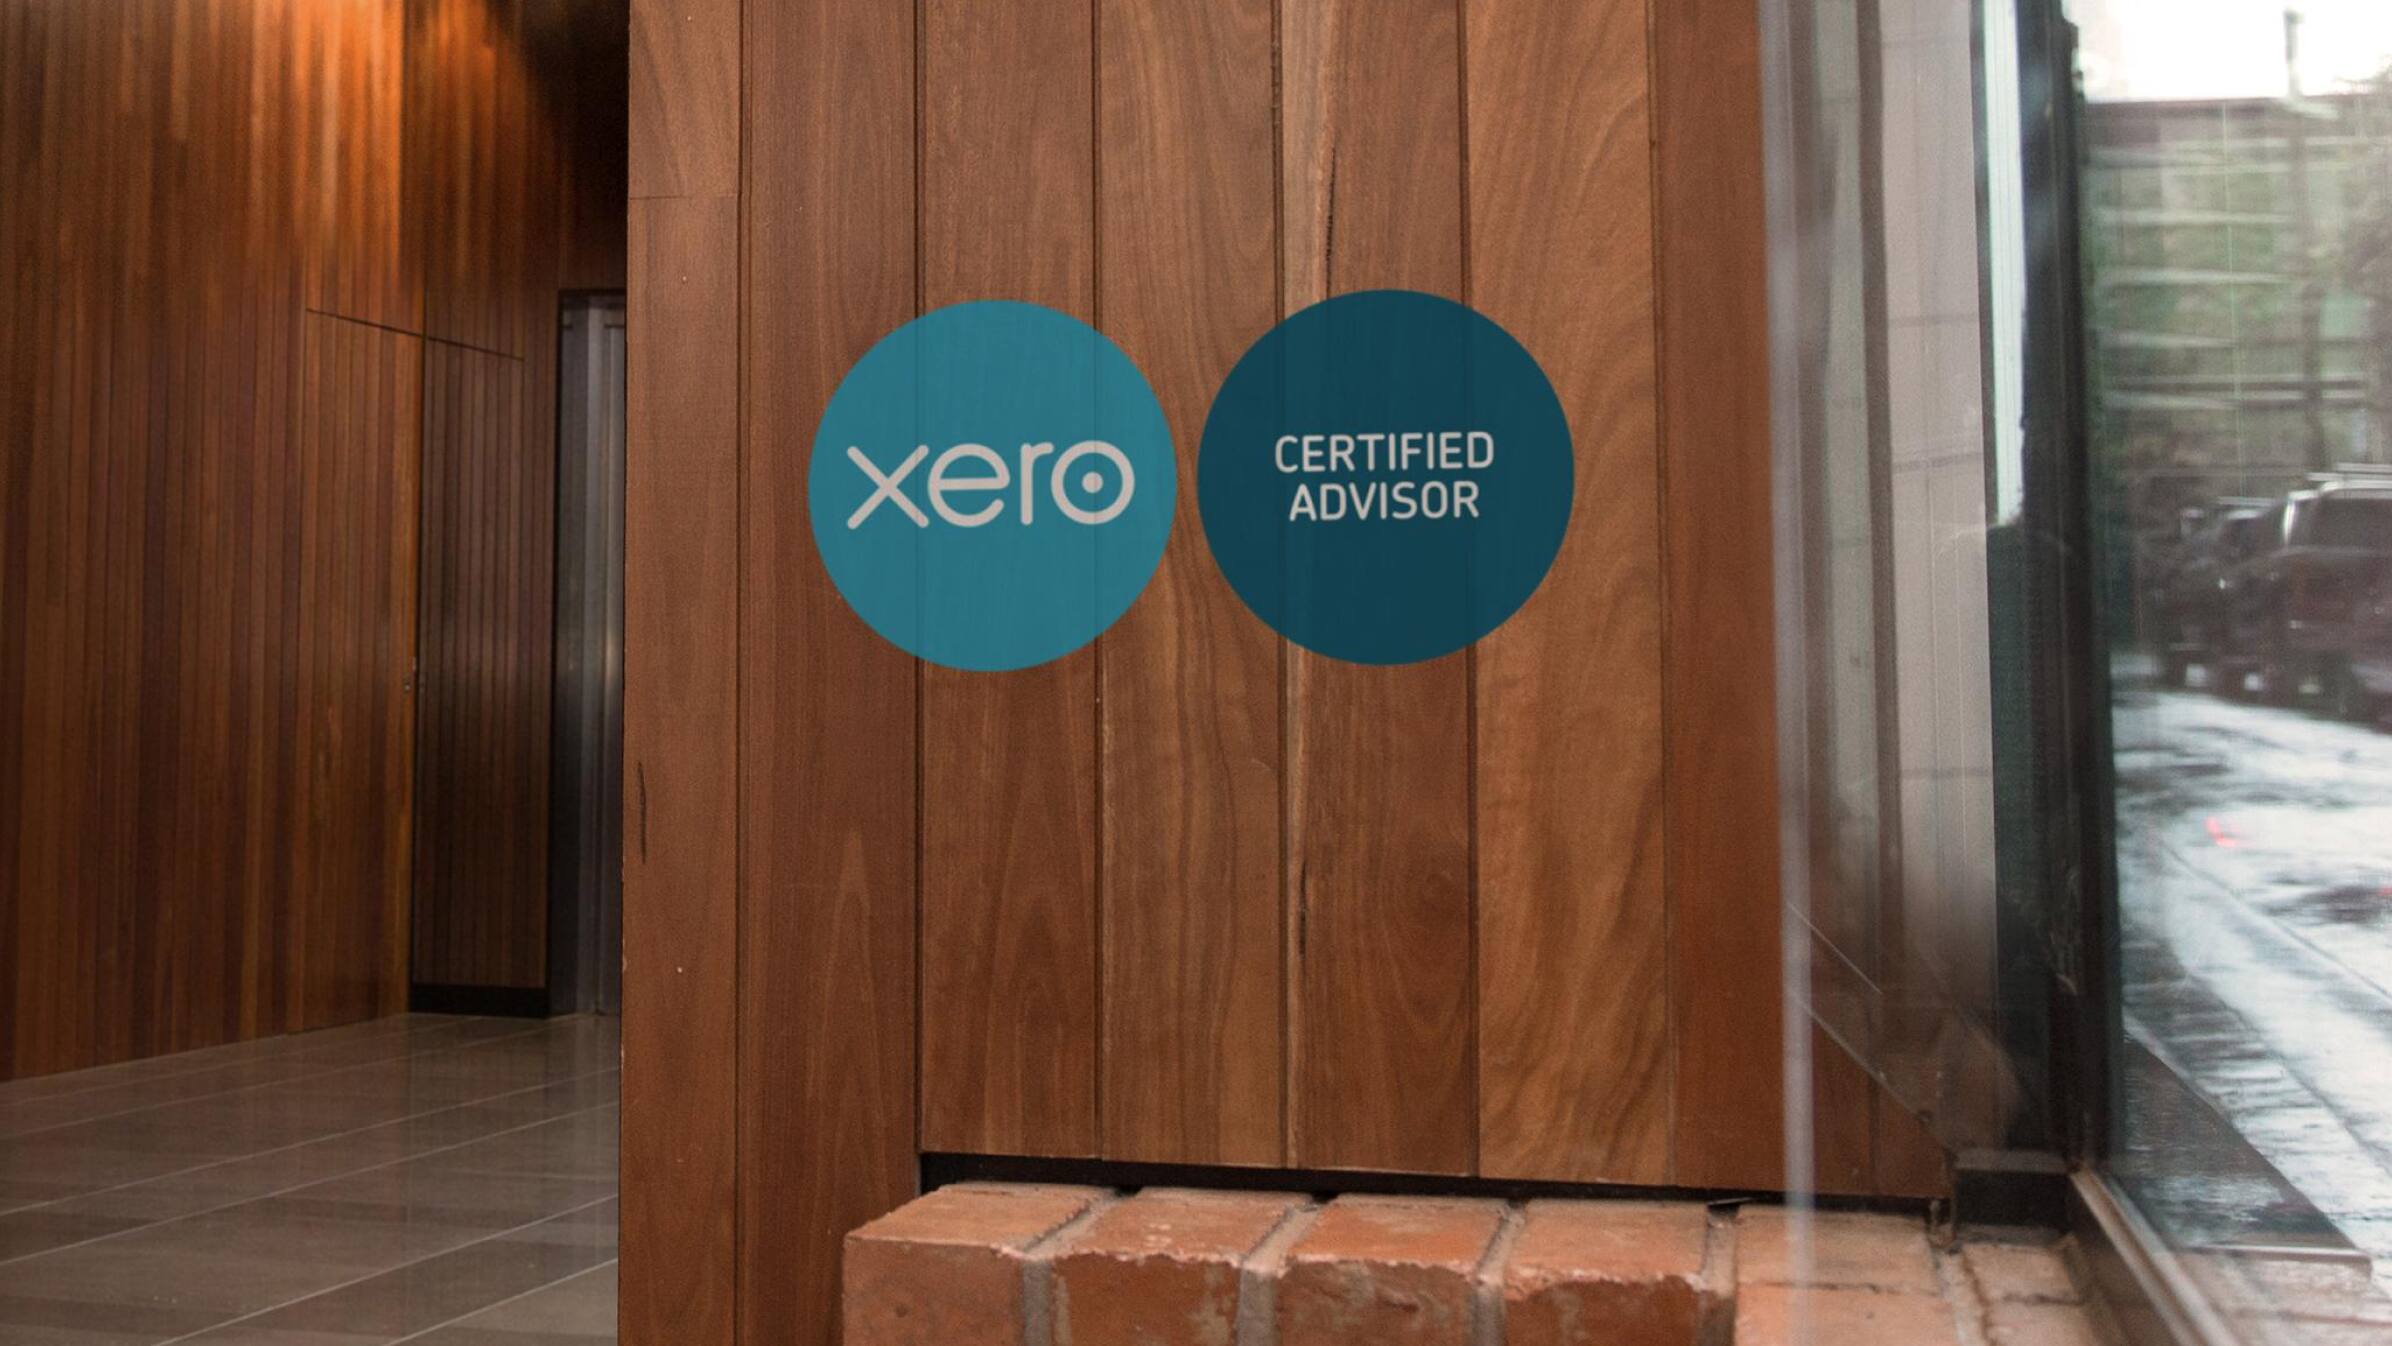 The Xero and certified advisor logos with the background of an office foyer. 